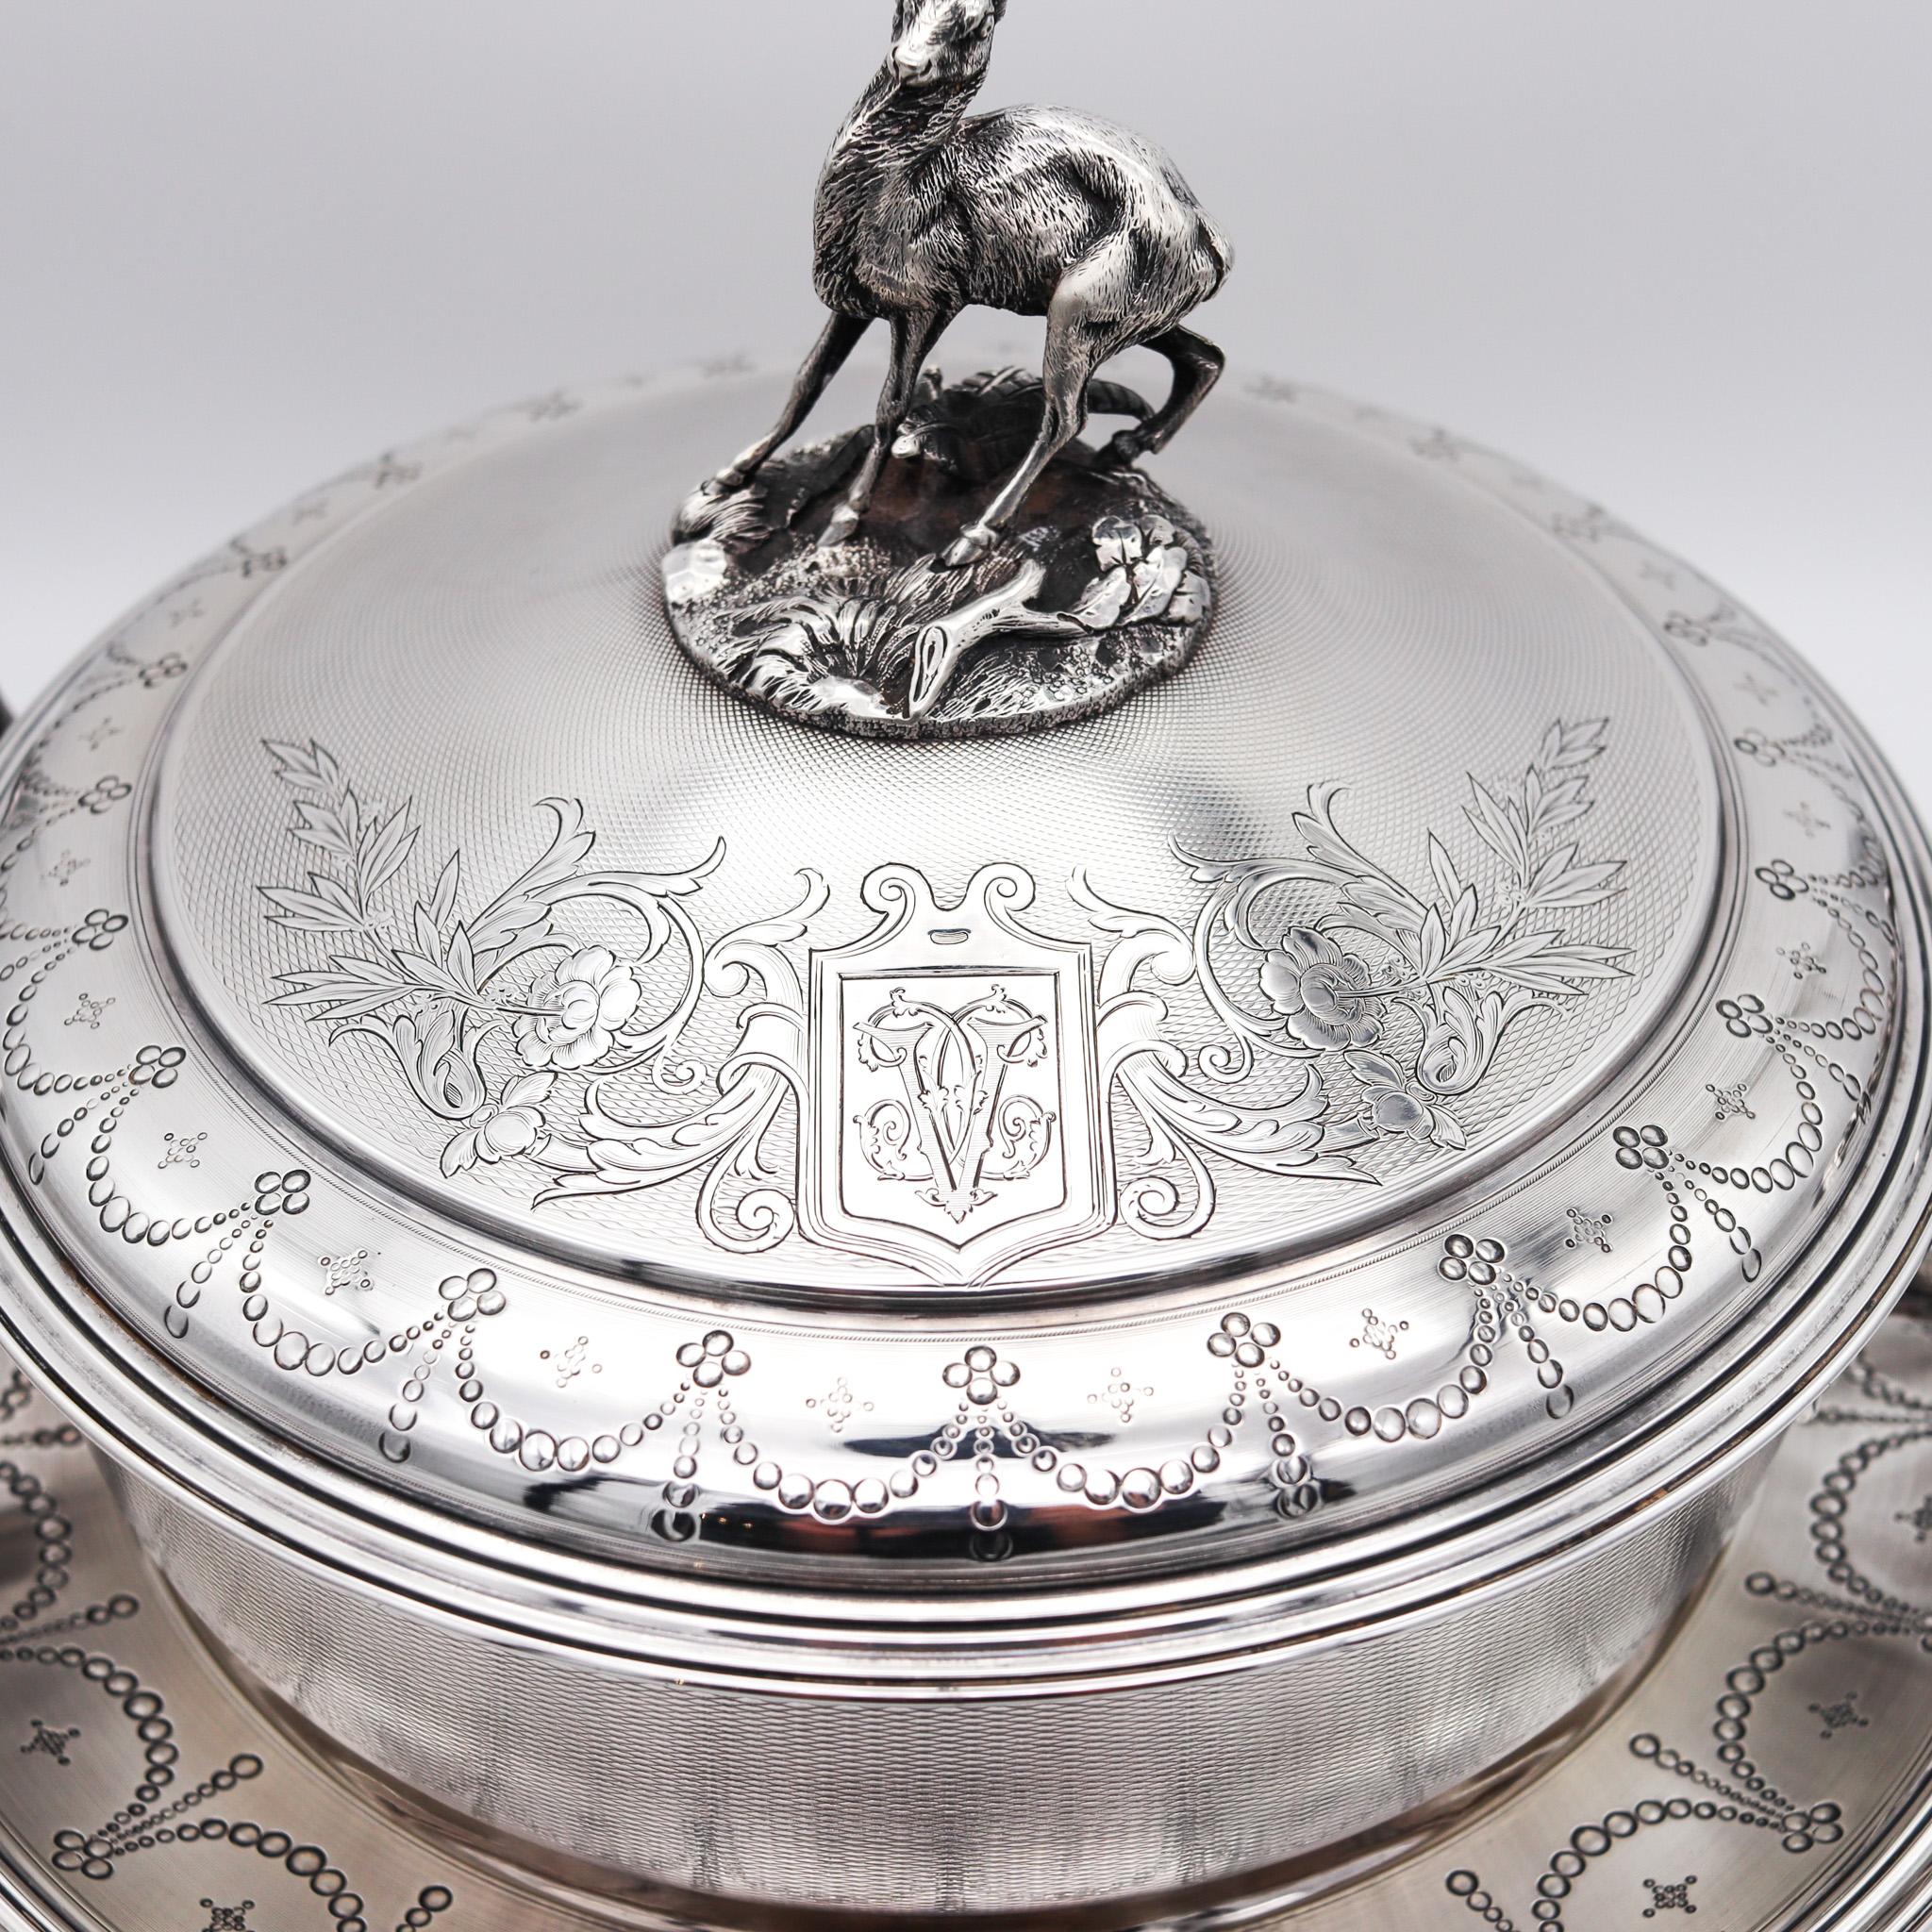 Tallois & Mayence 1885 Paris Covered Dish With Plate In .950 Sterling Silver For Sale 2